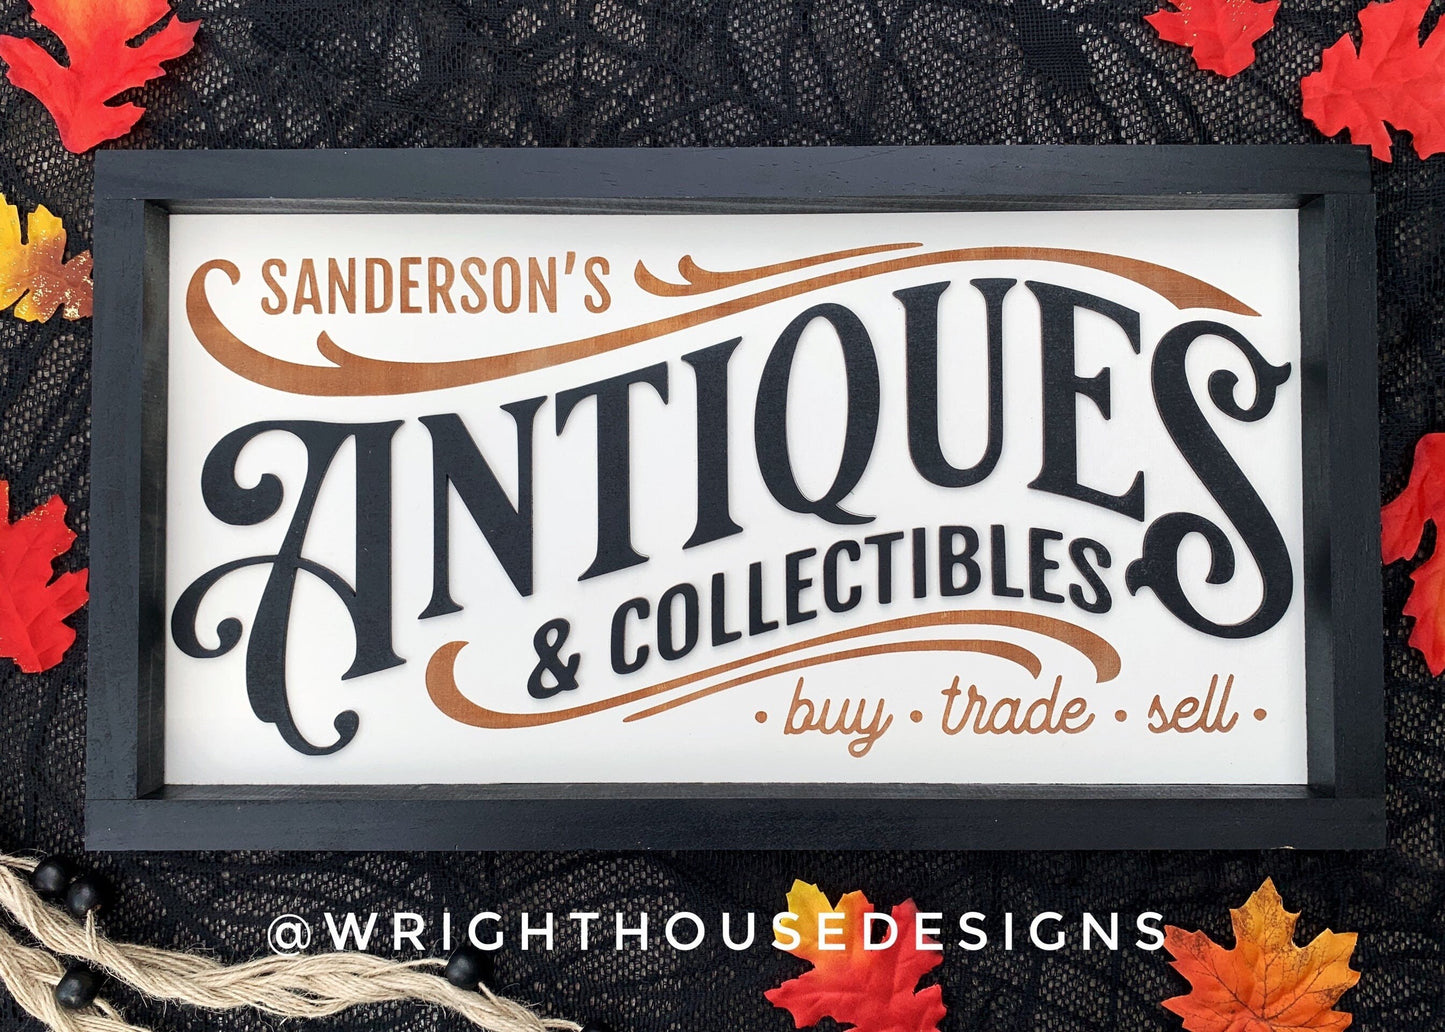 Sanderson’s Antiques - Halloween Witchy Wall Sign - Wooden Coffee Bar Sign - Dark Academia - Cottagcore Witch Home Decor - Gothic Wall Art